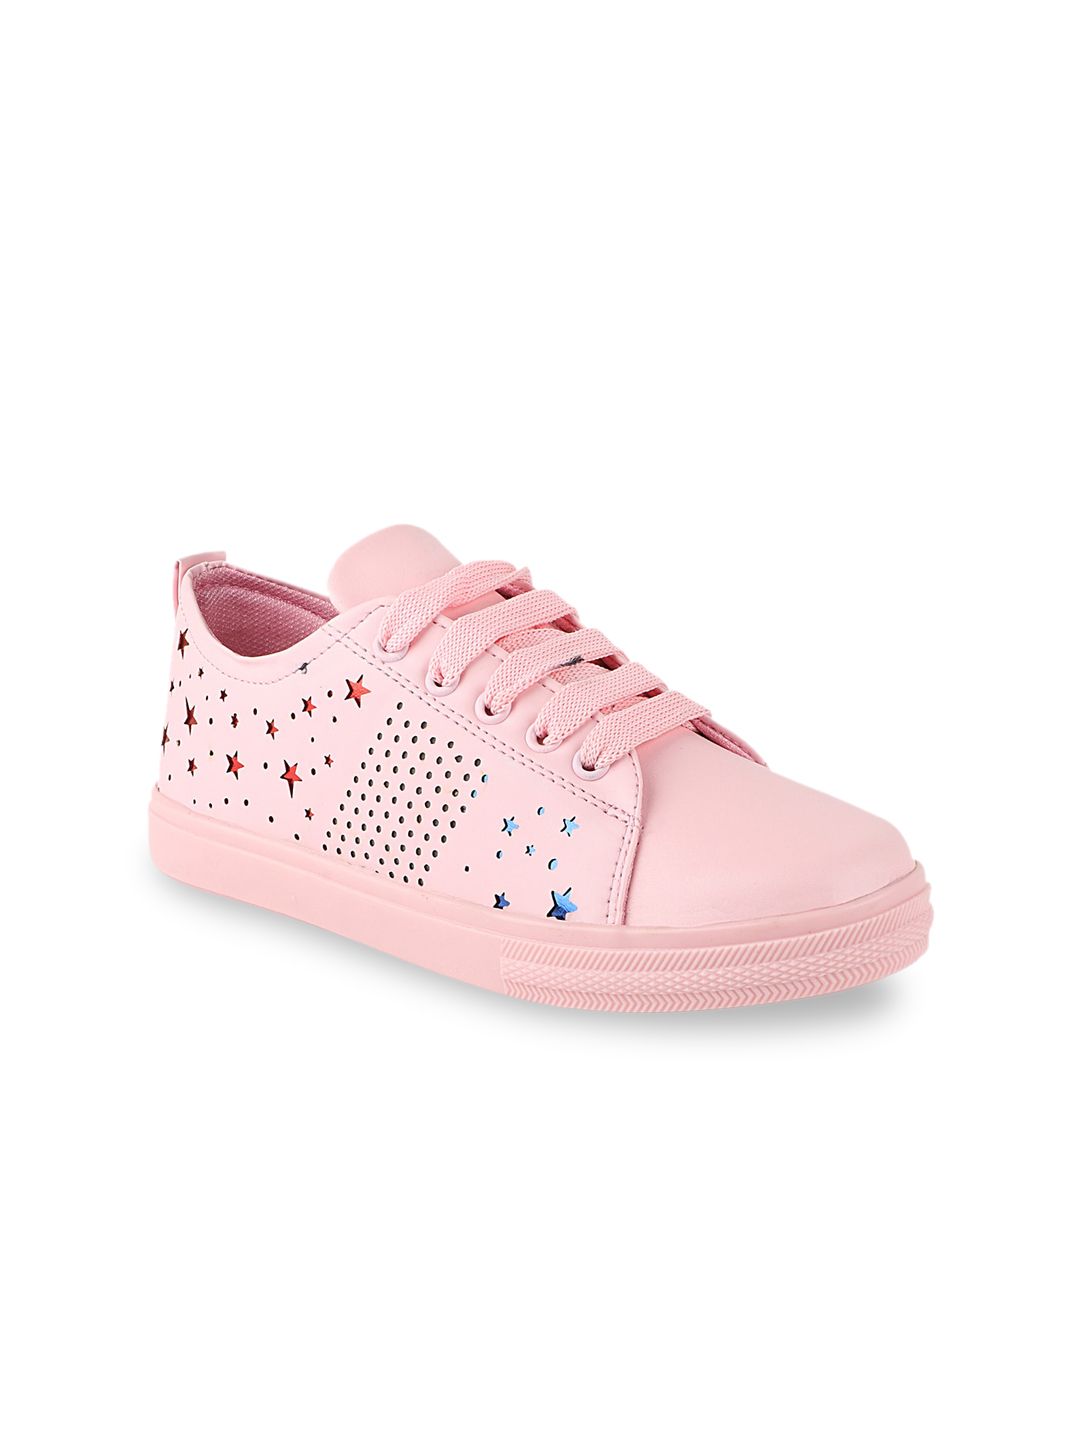 Shoetopia Women Pink Perforations Sneakers Price in India